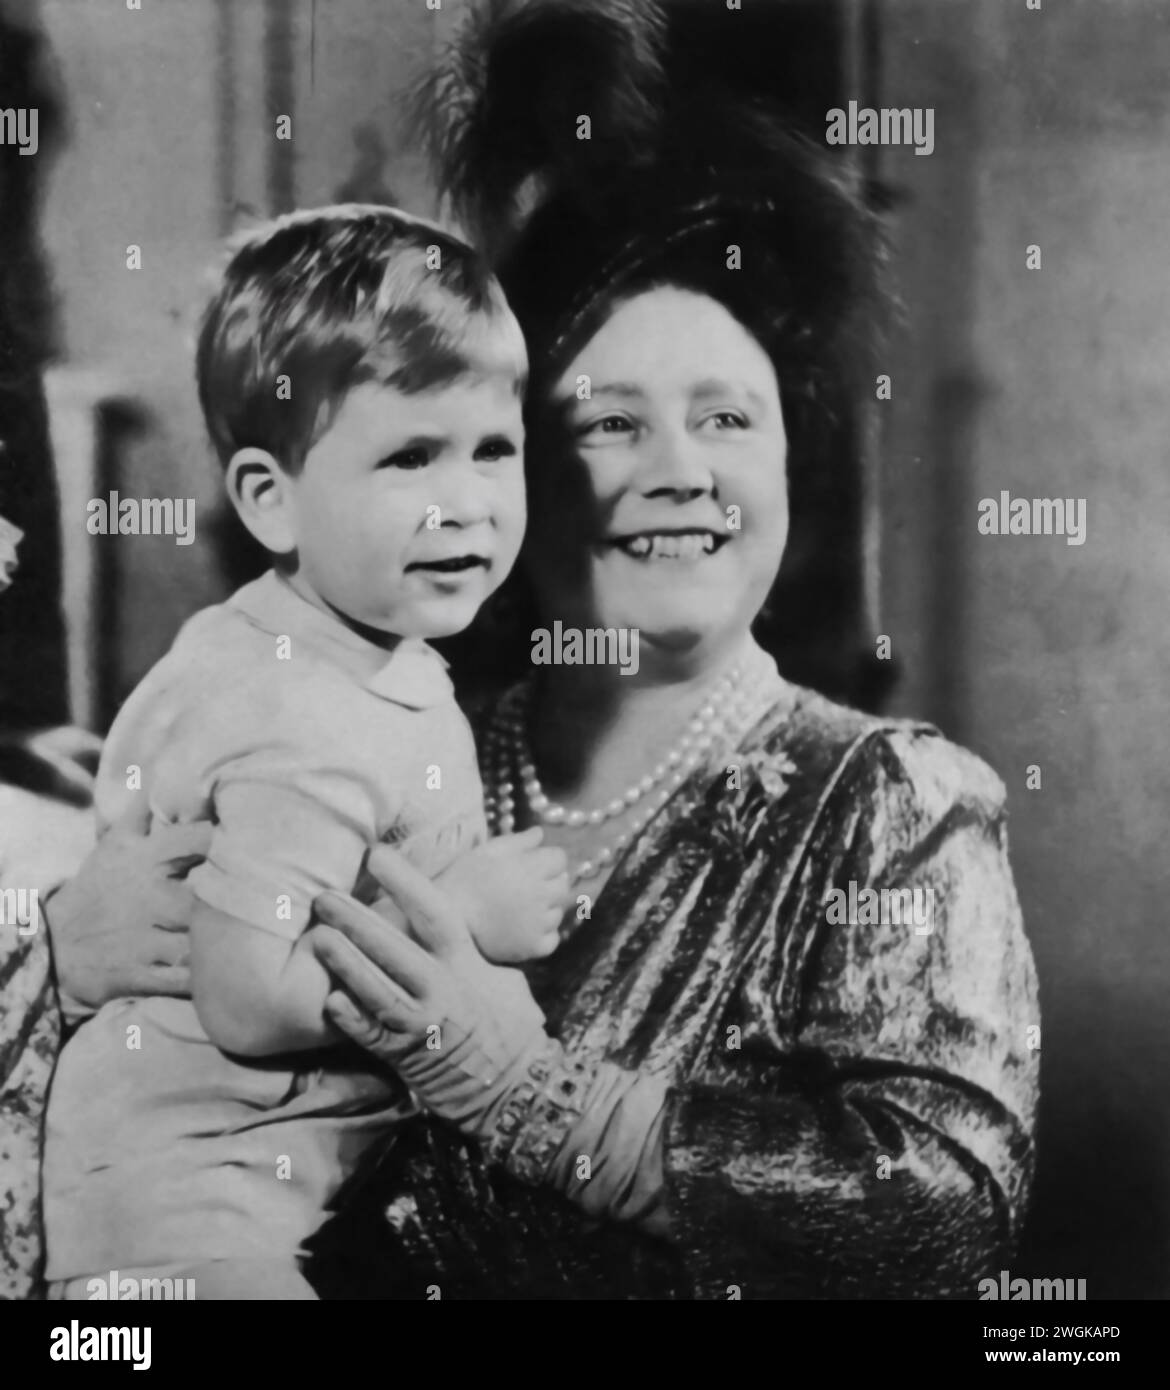 A young Prince Charles III is shown posing for the camera with Elizabeth I, known as the Queen Mother. This photograph captures a moment between the future King Charles III and his grandmother, offering a glimpse into the close relationship within the royal family. Stock Photo